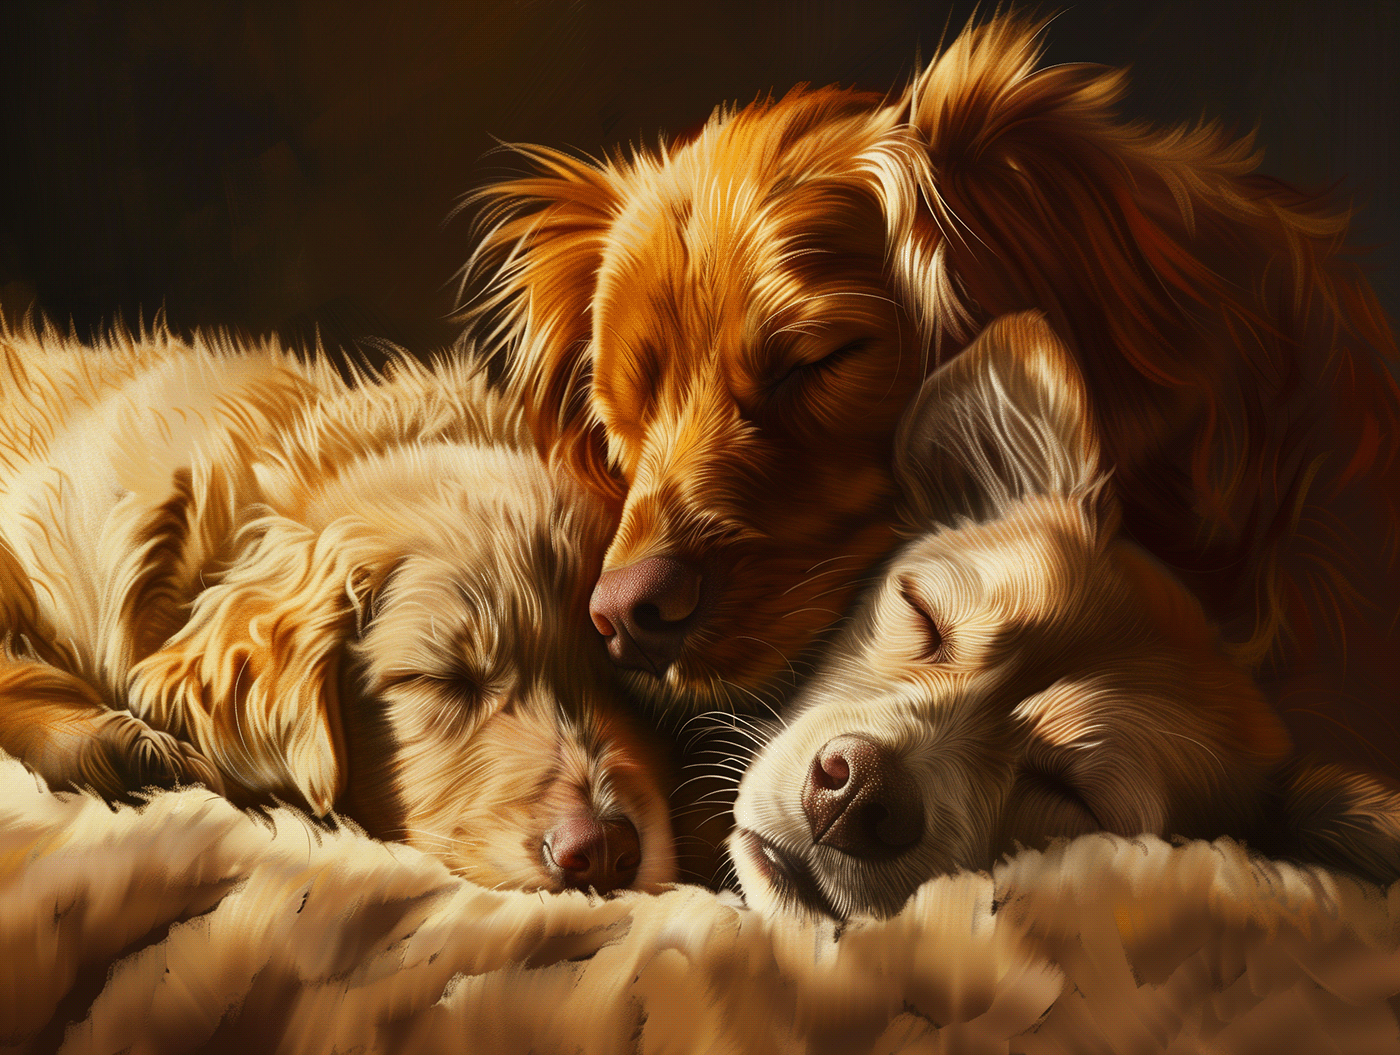 napping sleeping animals pets AI generated images photorealistic